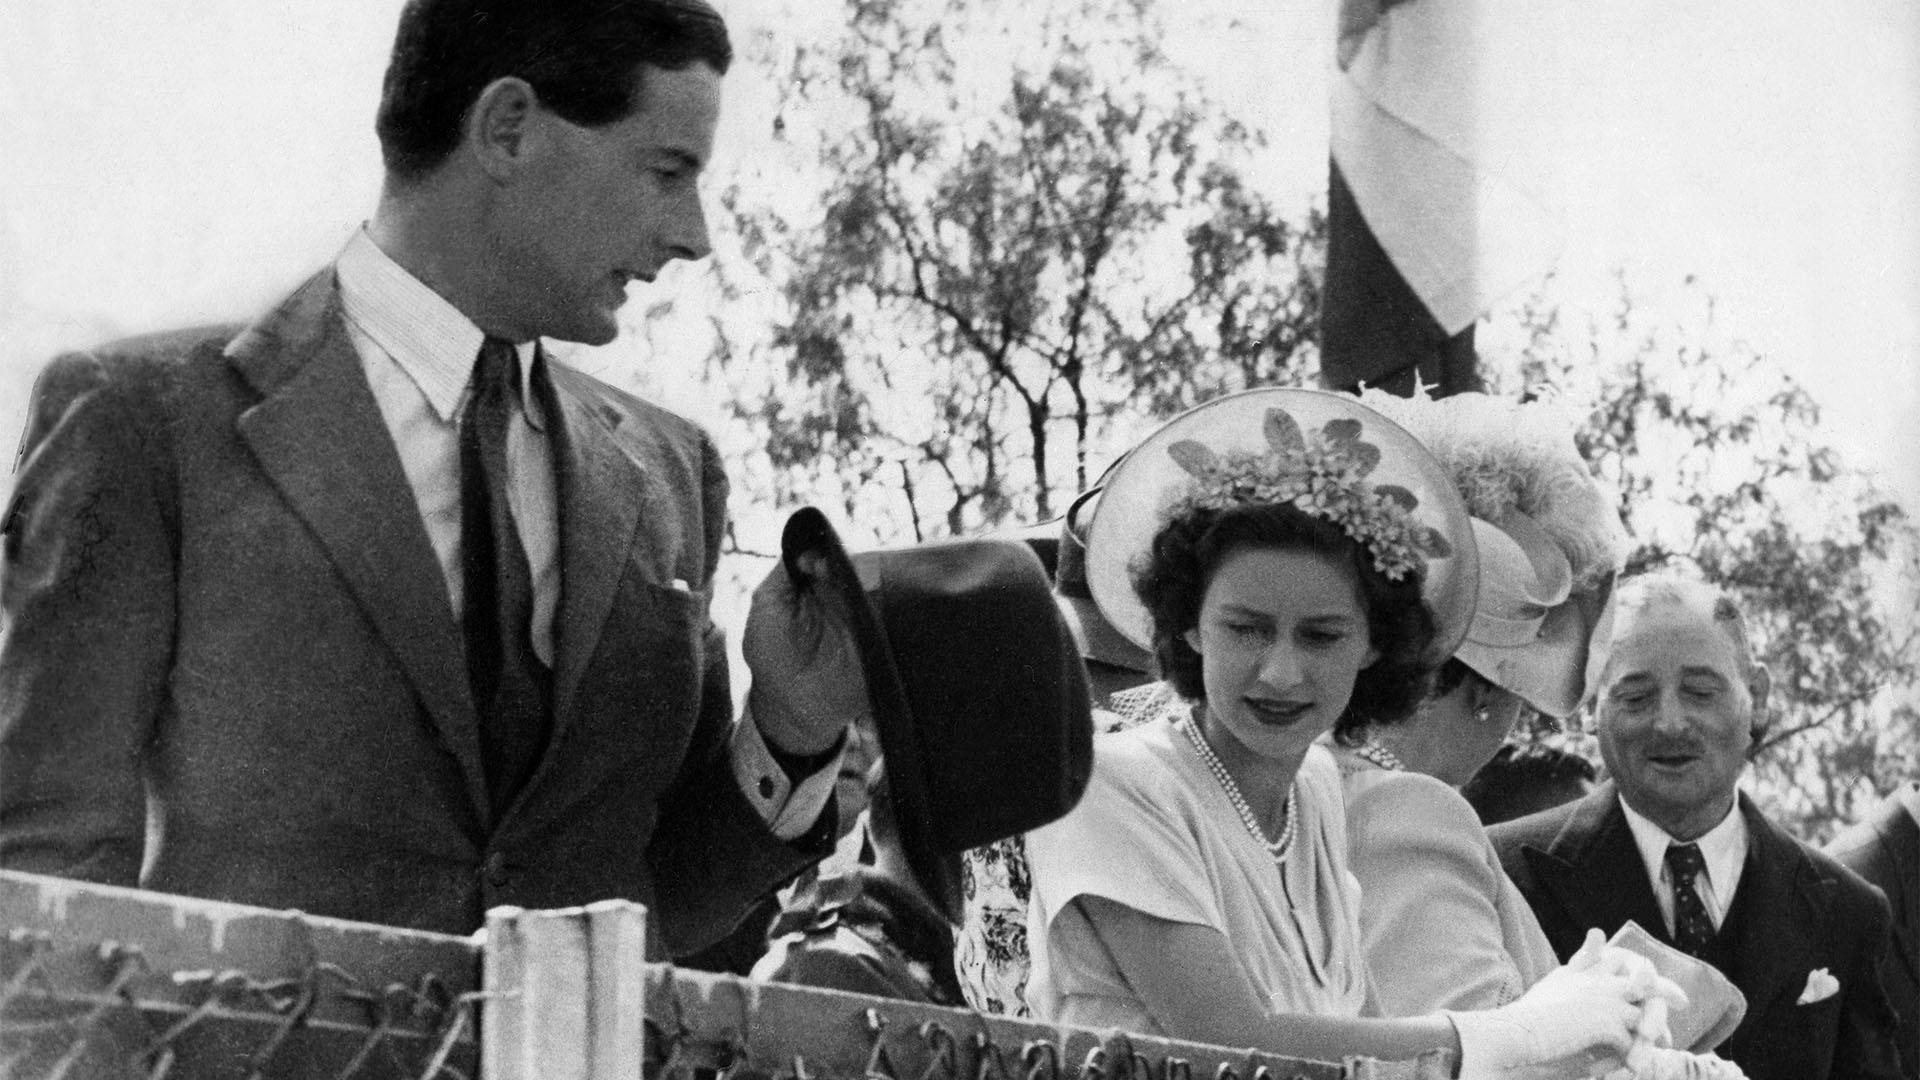 Princess Margaret with Peter Townsend in South Africa.